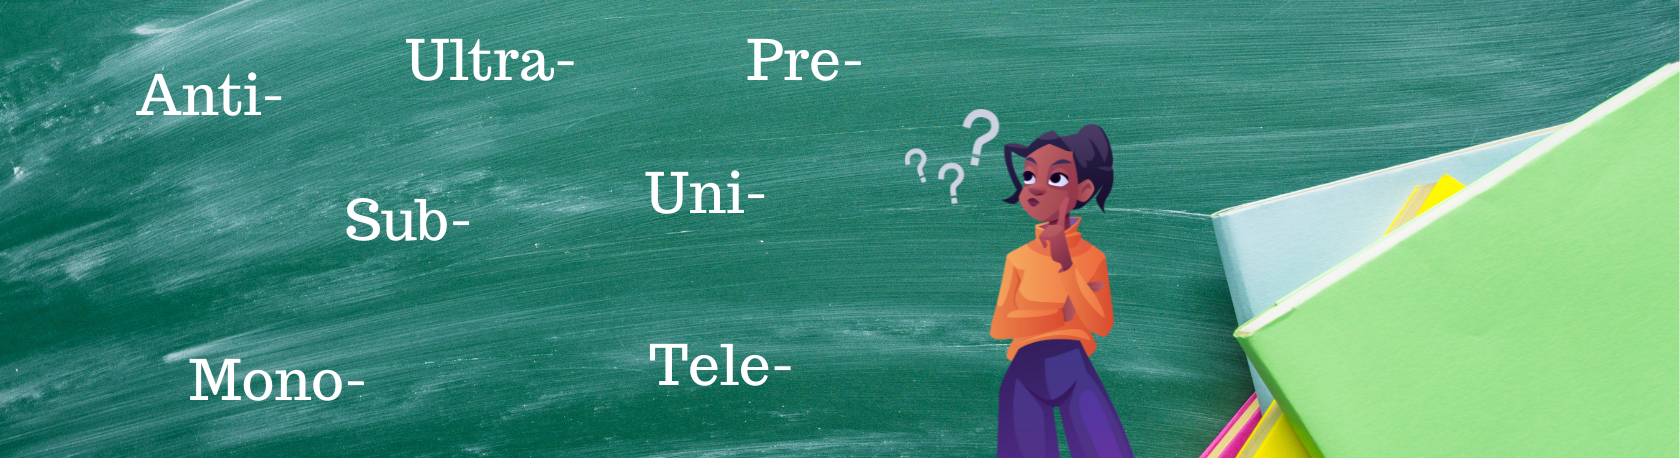 Work on your Spanish Grammar and review the Spanish prefijos - Spanish grammar - Learn Spanish - Speak Spanish - Practice Spanish - Easy Español